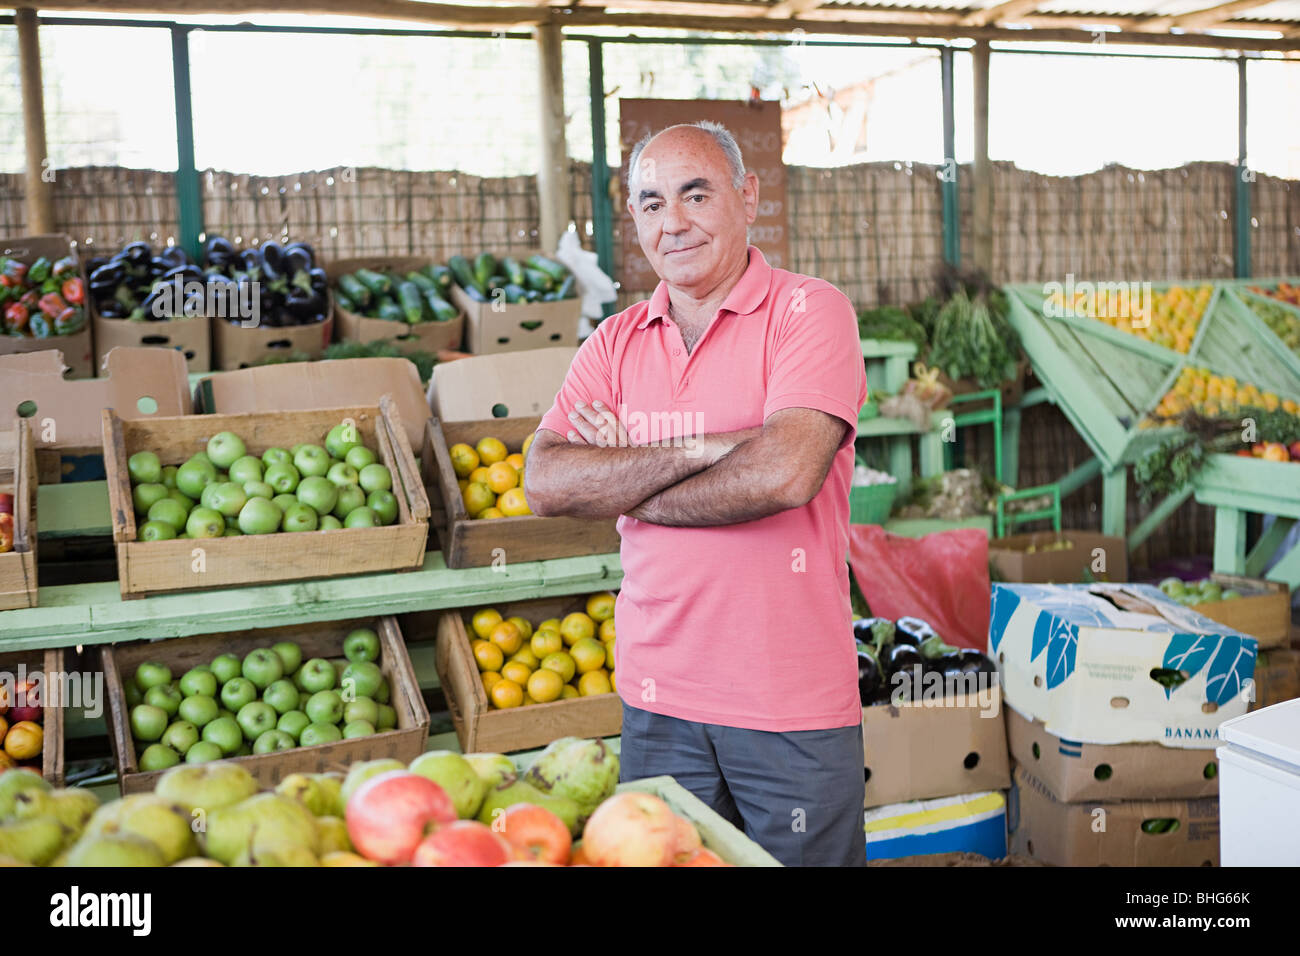 Market trader at fruit and vegetable stall Stock Photo